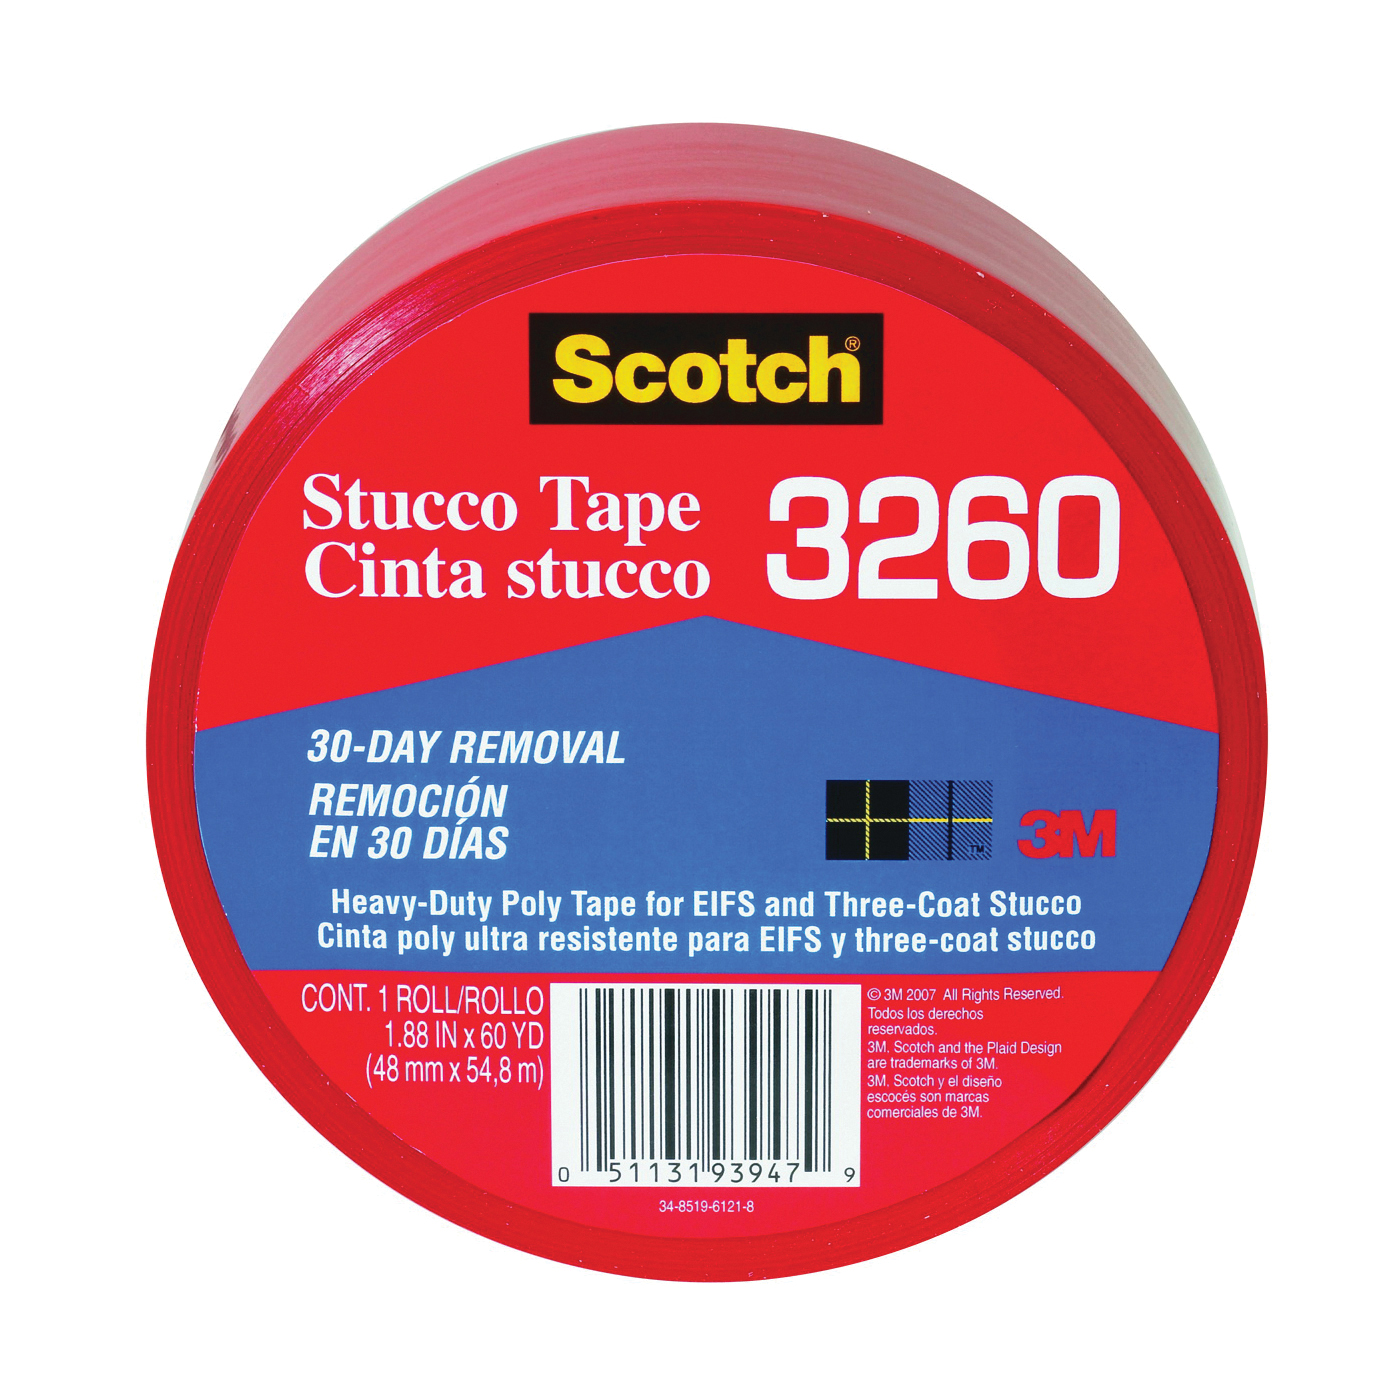 Scotch 3260-A Duct Tape, 60 yd L, 1.88 in W, Polyvinyl Backing, Pink/Red